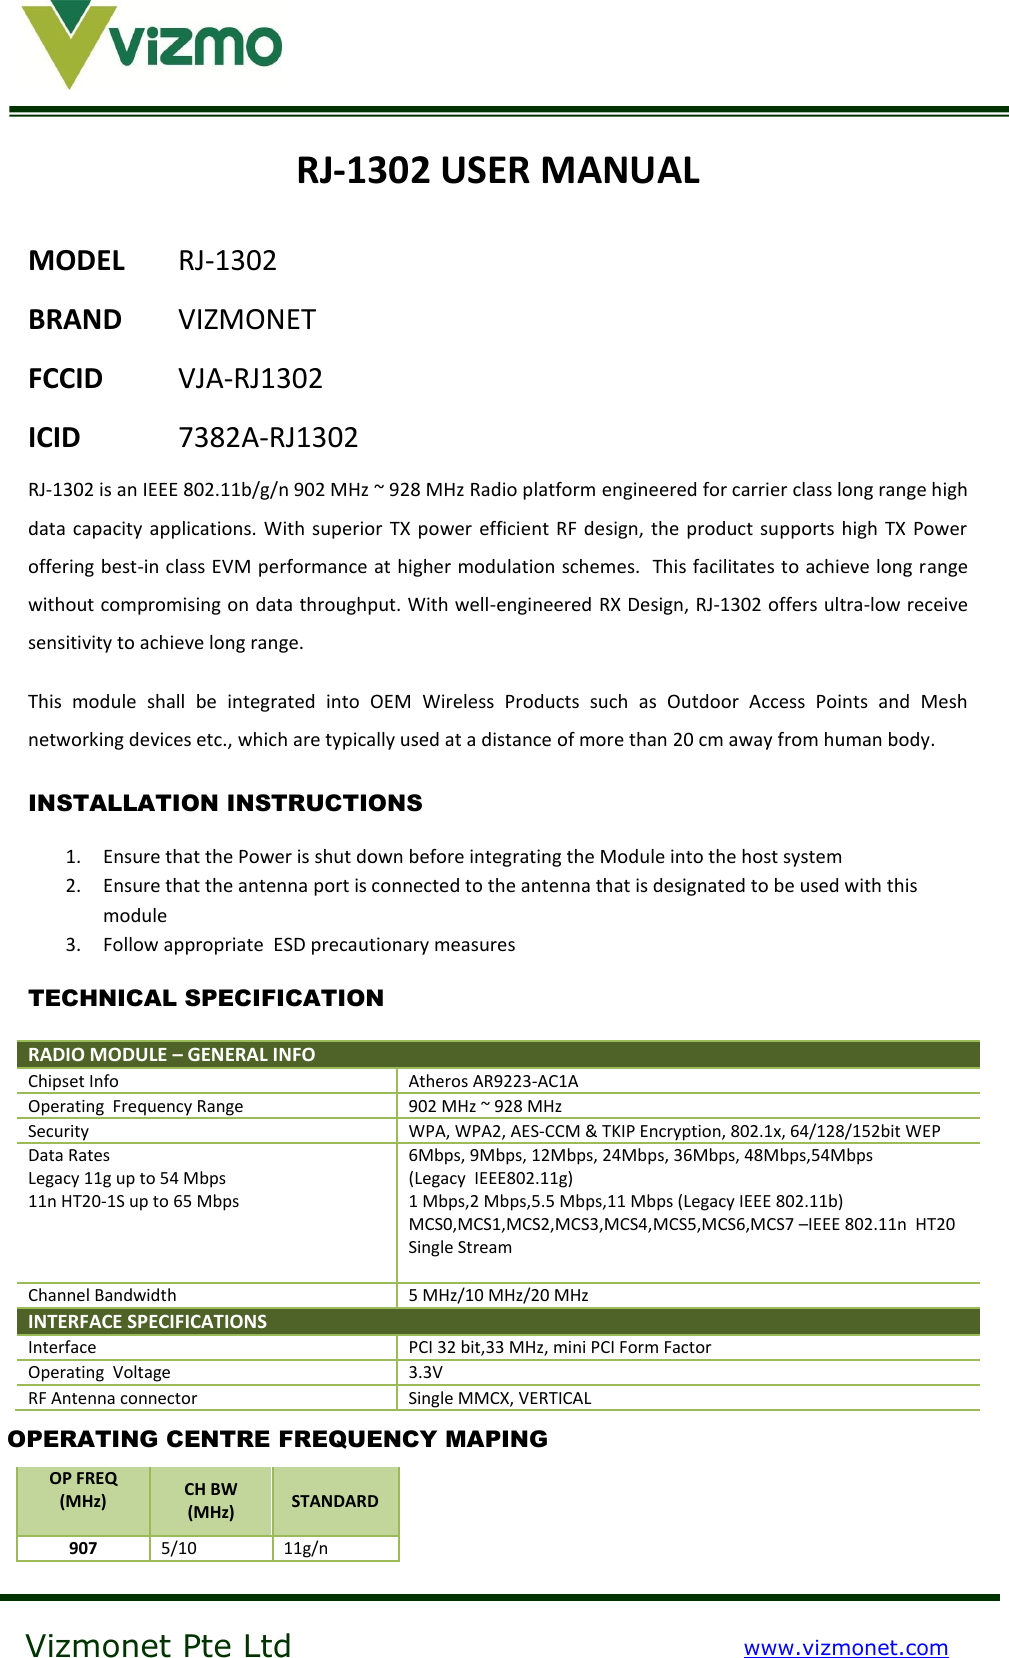    Vizmonet Pte Ltd www.vizmonet.com  RJ-1302 USER MANUAL MODEL RJ-1302 BRAND  VIZMONET FCCID  VJA-RJ1302 ICID    7382A-RJ1302 RJ-1302 is an IEEE 802.11b/g/n 902 MHz ~ 928 MHz Radio platform engineered for carrier class long range high data capacity applications. With  superior  TX power efficient RF design, the product supports high  TX Power offering best-in class EVM performance at higher modulation schemes.  This facilitates to achieve long range without compromising on data throughput. With well-engineered RX Design, RJ-1302 offers ultra-low receive sensitivity to achieve long range.  This  module  shall  be  integrated  into  OEM  Wireless  Products  such  as  Outdoor  Access  Points  and  Mesh networking devices etc., which are typically used at a distance of more than 20 cm away from human body. INSTALLATION INSTRUCTIONS 1. Ensure that the Power is shut down before integrating the Module into the host system 2. Ensure that the antenna port is connected to the antenna that is designated to be used with this module 3. Follow appropriate  ESD precautionary measures  TECHNICAL SPECIFICATION RADIO MODULE – GENERAL INFO  Chipset Info Atheros AR9223-AC1A Operating  Frequency Range 902 MHz ~ 928 MHz Security WPA, WPA2, AES-CCM &amp; TKIP Encryption, 802.1x, 64/128/152bit WEP Data Rates Legacy 11g up to 54 Mbps 11n HT20-1S up to 65 Mbps  6Mbps, 9Mbps, 12Mbps, 24Mbps, 36Mbps, 48Mbps,54Mbps   (Legacy  IEEE802.11g) 1 Mbps,2 Mbps,5.5 Mbps,11 Mbps (Legacy IEEE 802.11b) MCS0,MCS1,MCS2,MCS3,MCS4,MCS5,MCS6,MCS7 –IEEE 802.11n  HT20  Single Stream  Channel Bandwidth 5 MHz/10 MHz/20 MHz INTERFACE SPECIFICATIONS  Interface PCI 32 bit,33 MHz, mini PCI Form Factor Operating  Voltage 3.3V RF Antenna connector Single MMCX, VERTICAL  OP FREQ (MHz)  CH BW (MHz) STANDARD 907 5/10 11g/n OPERATING CENTRE FREQUENCY MAPING 